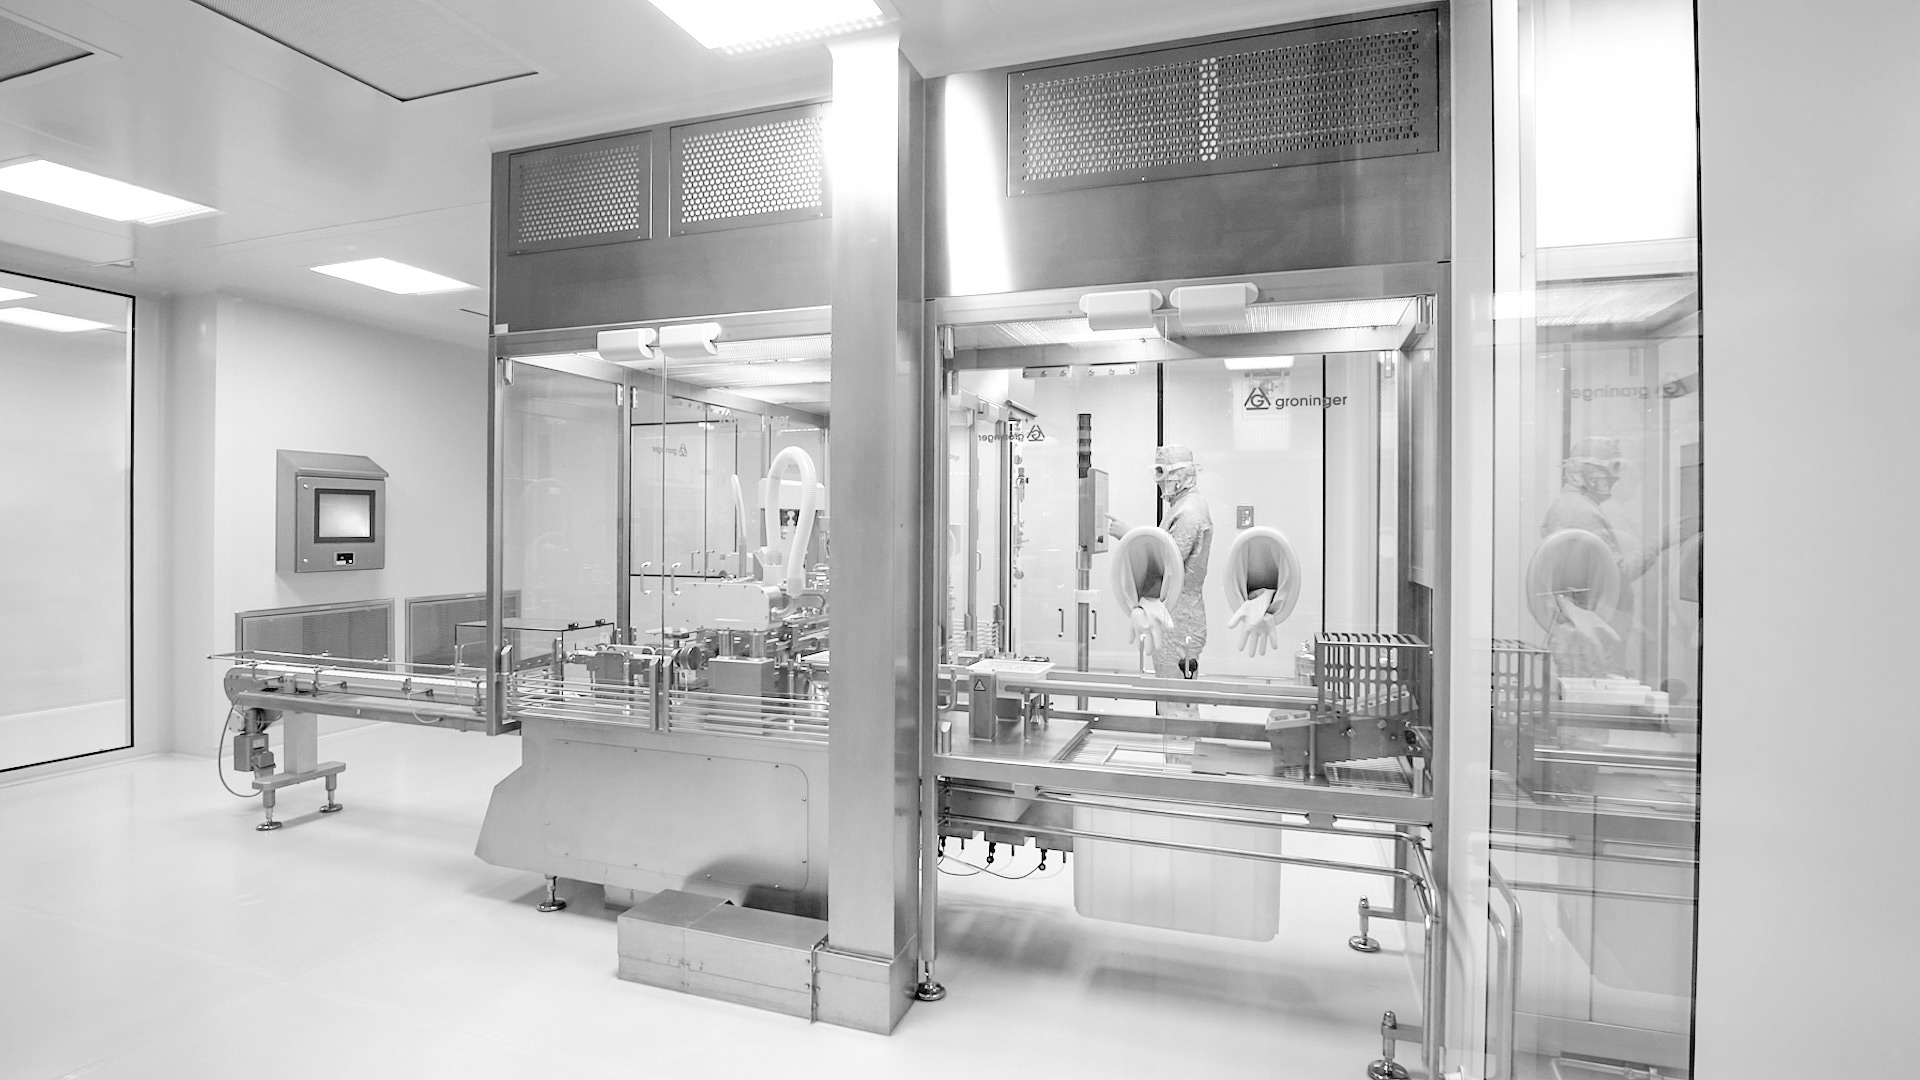 Aseptic processing in a cleanroom